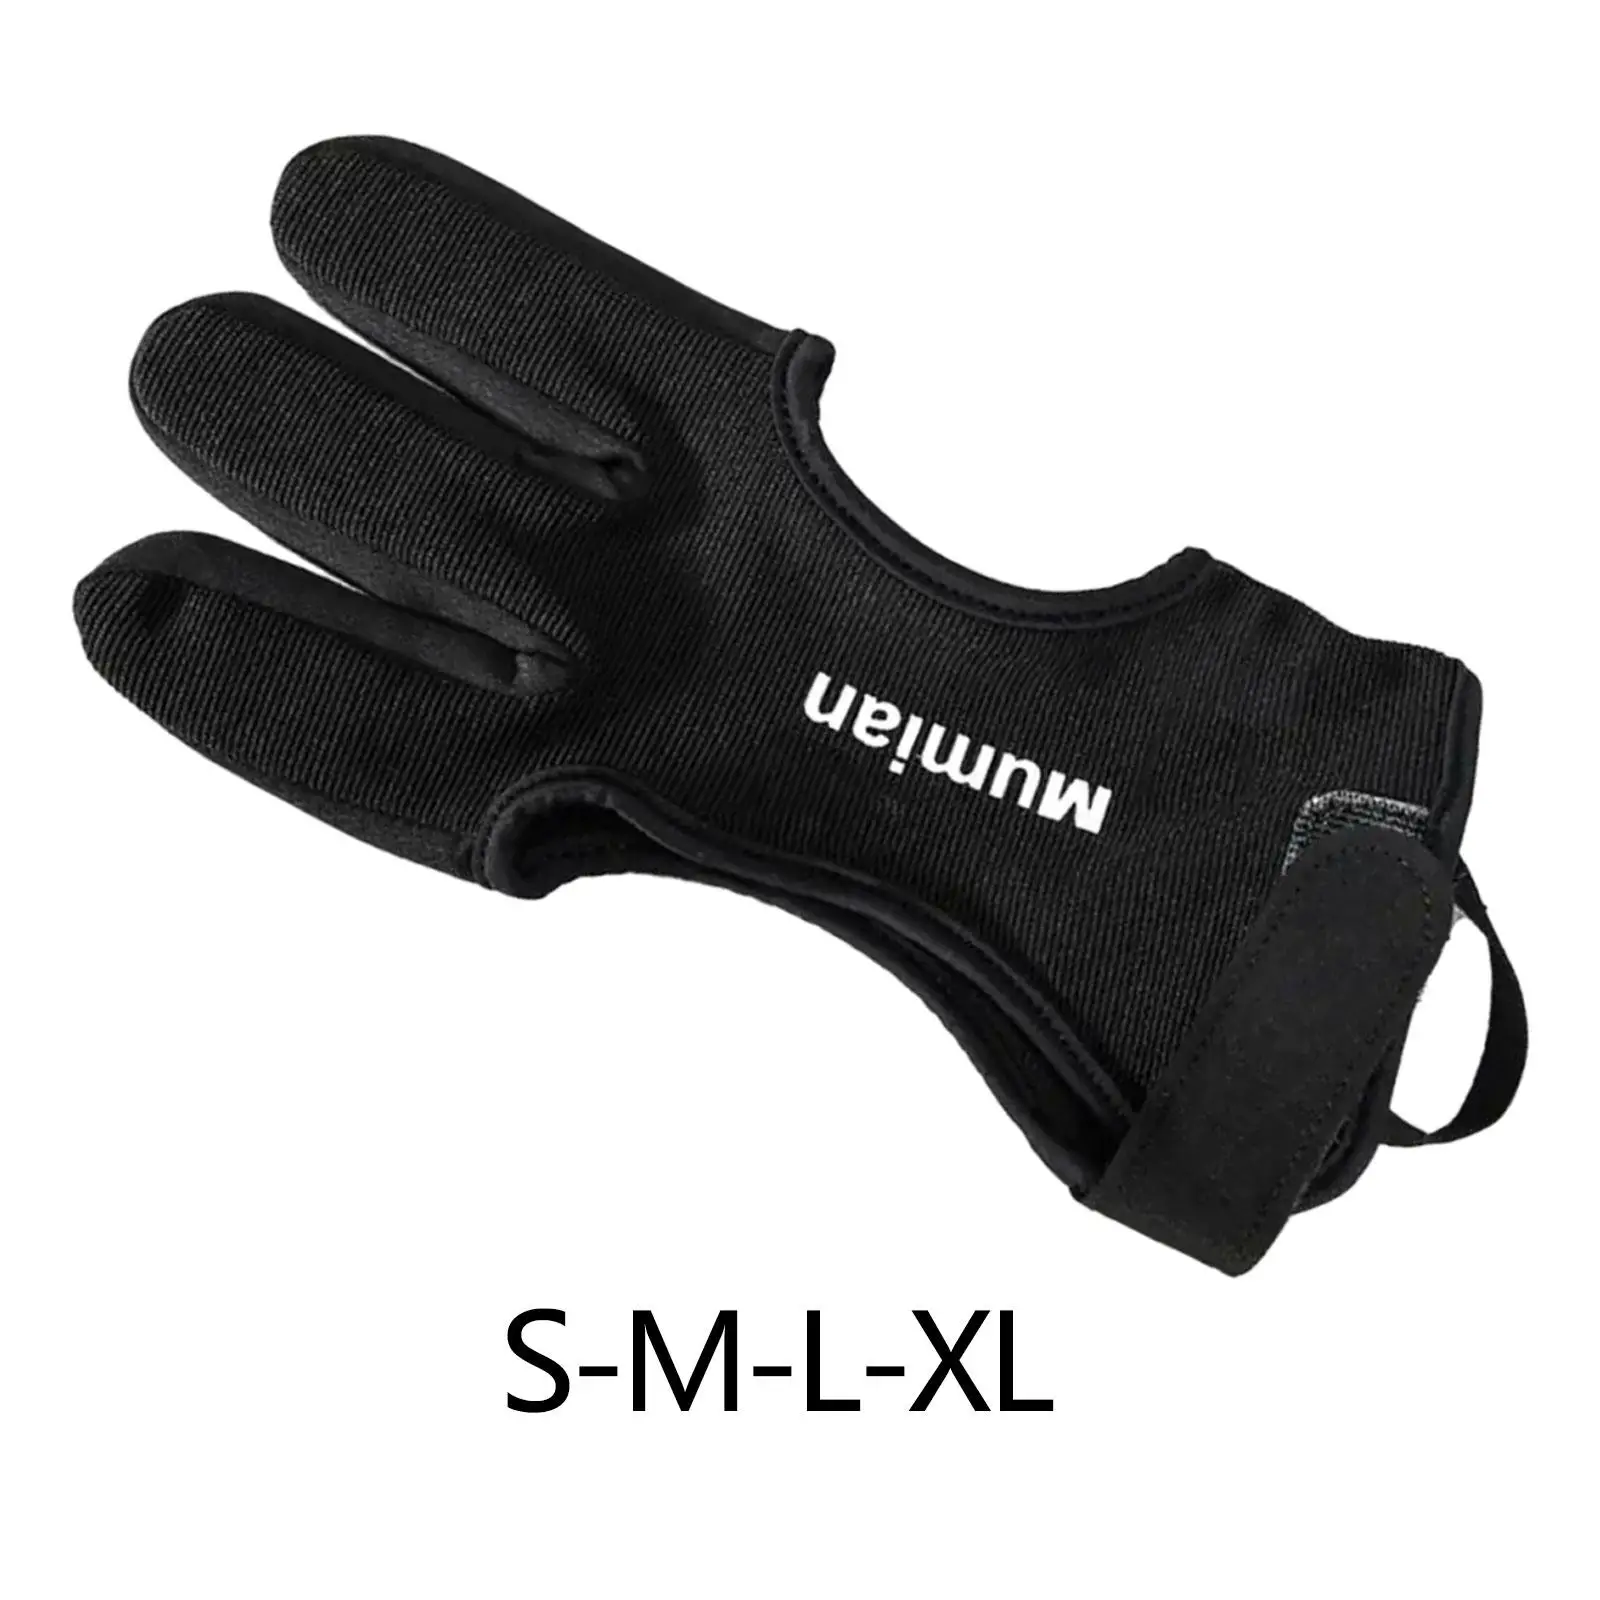 Archery Glove for Left and Right Hand Archery Accessories Archery Finger Guard for Beginner Adult Men Women Archery Practice